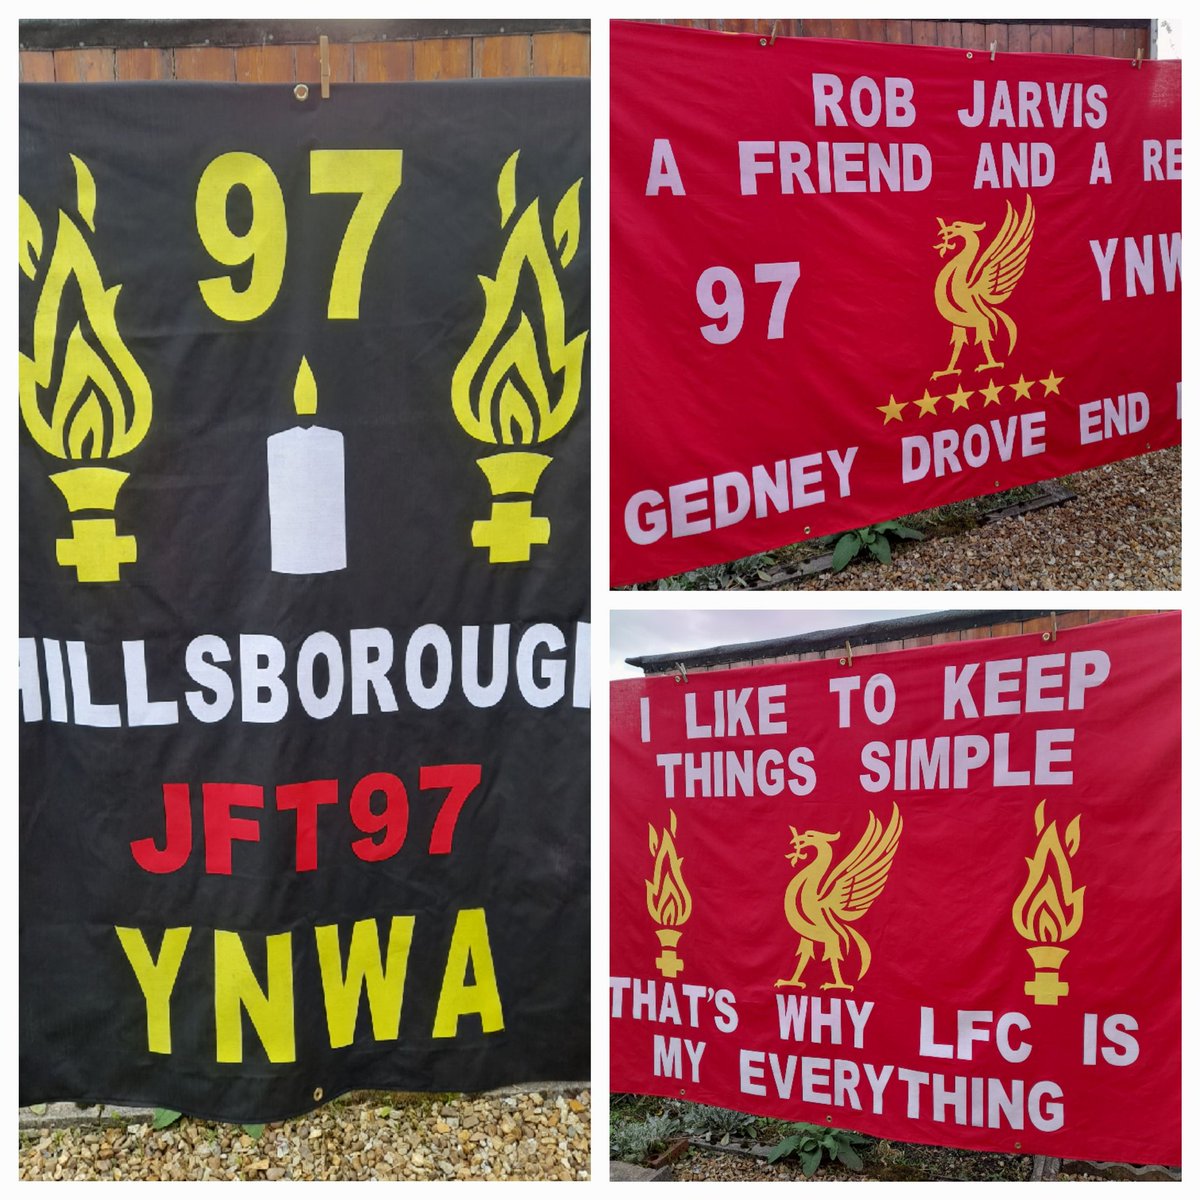 NEW. All three banners designed by @Darrengibson72 Made by Banners and Flags. 🔴⚪️🟡 #JFT97 #HillsboroughLawNow #dontbuythesun YNWA